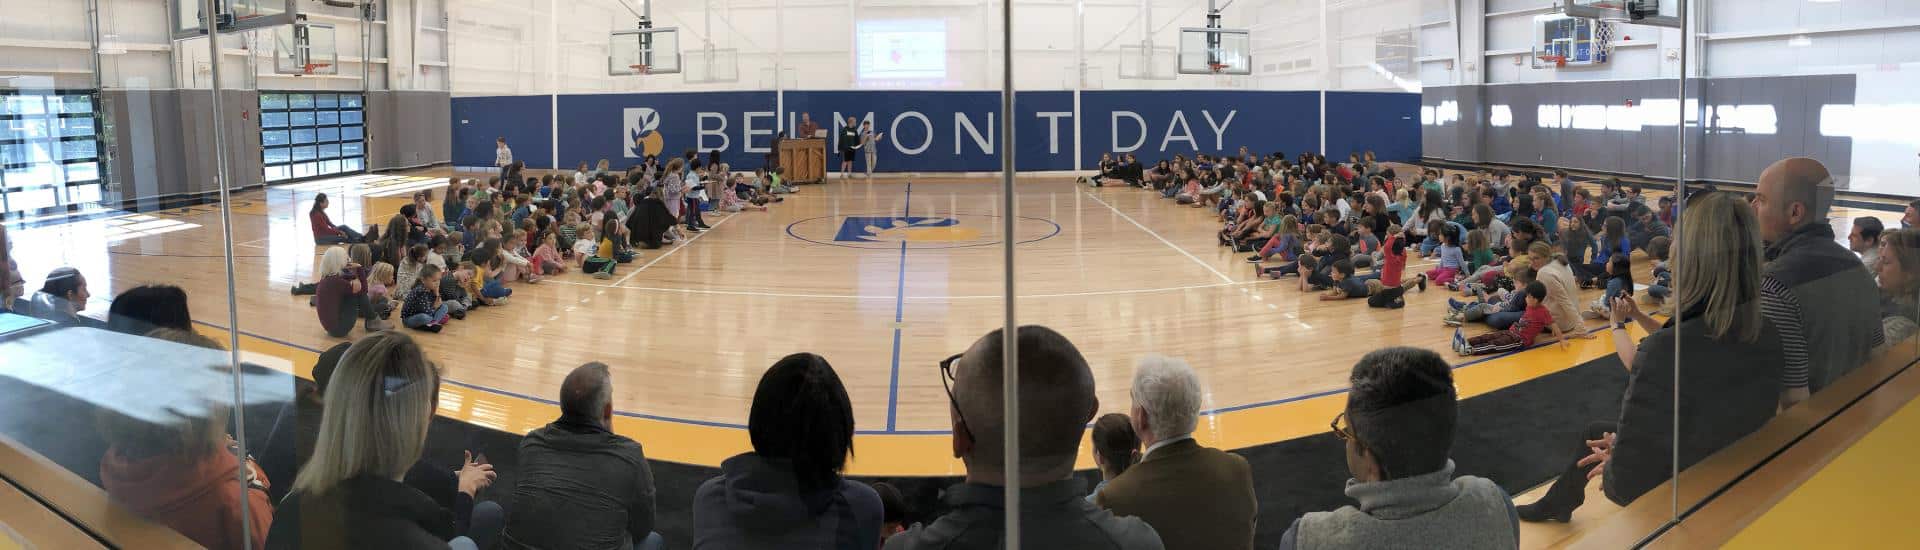 A view into the Barn gym at a sharing assembly